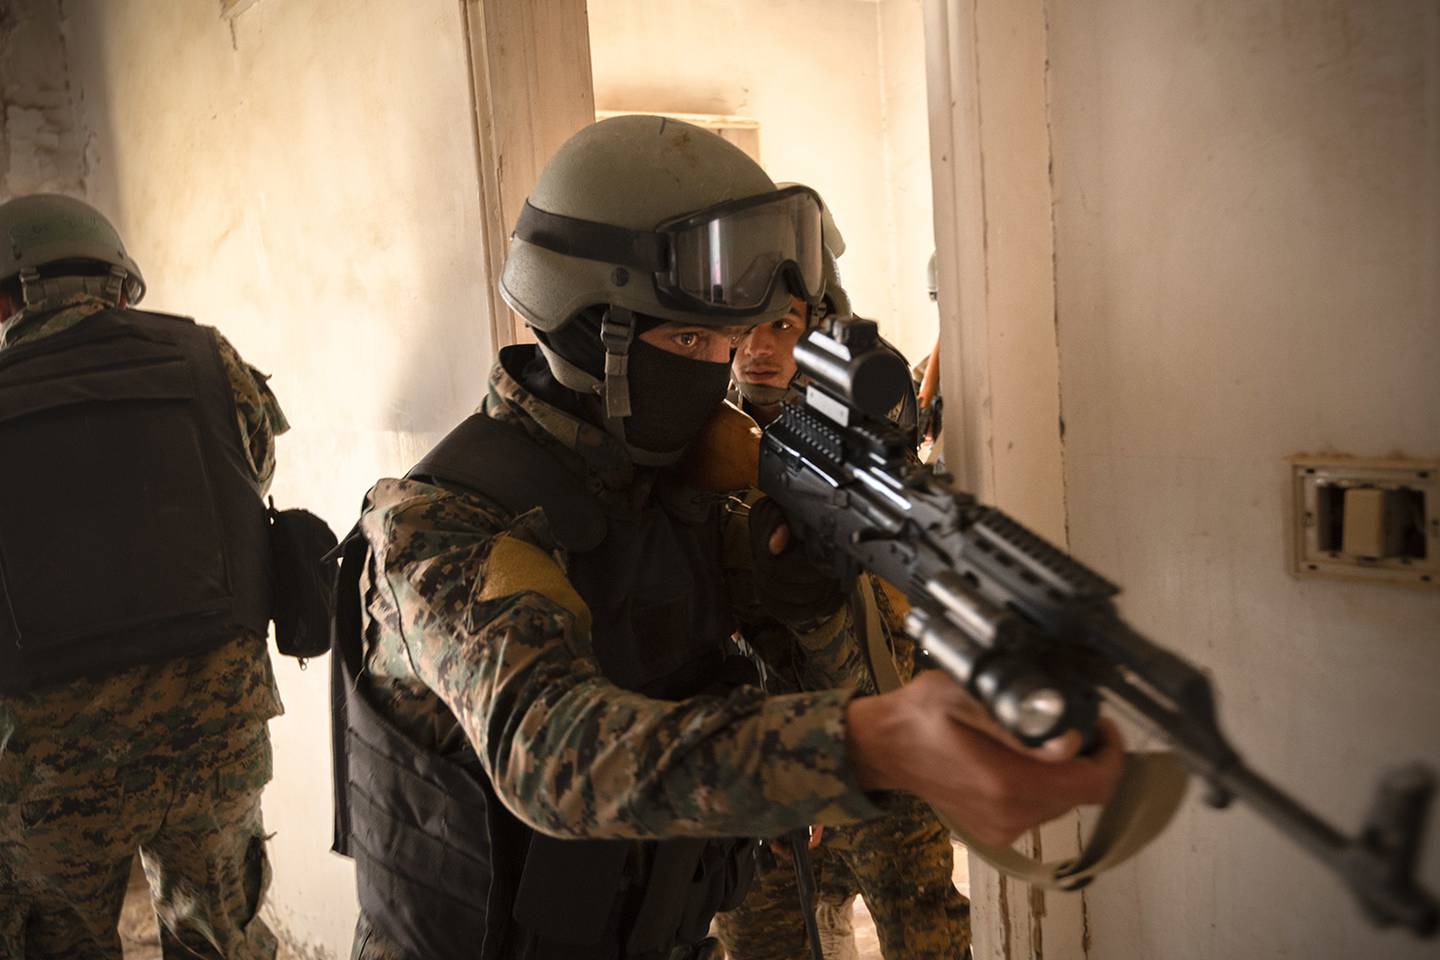 Syrian Democratic Force commando cadets clear a room during military operations in urban terrain training in Syria, Aug. 3, 2019.